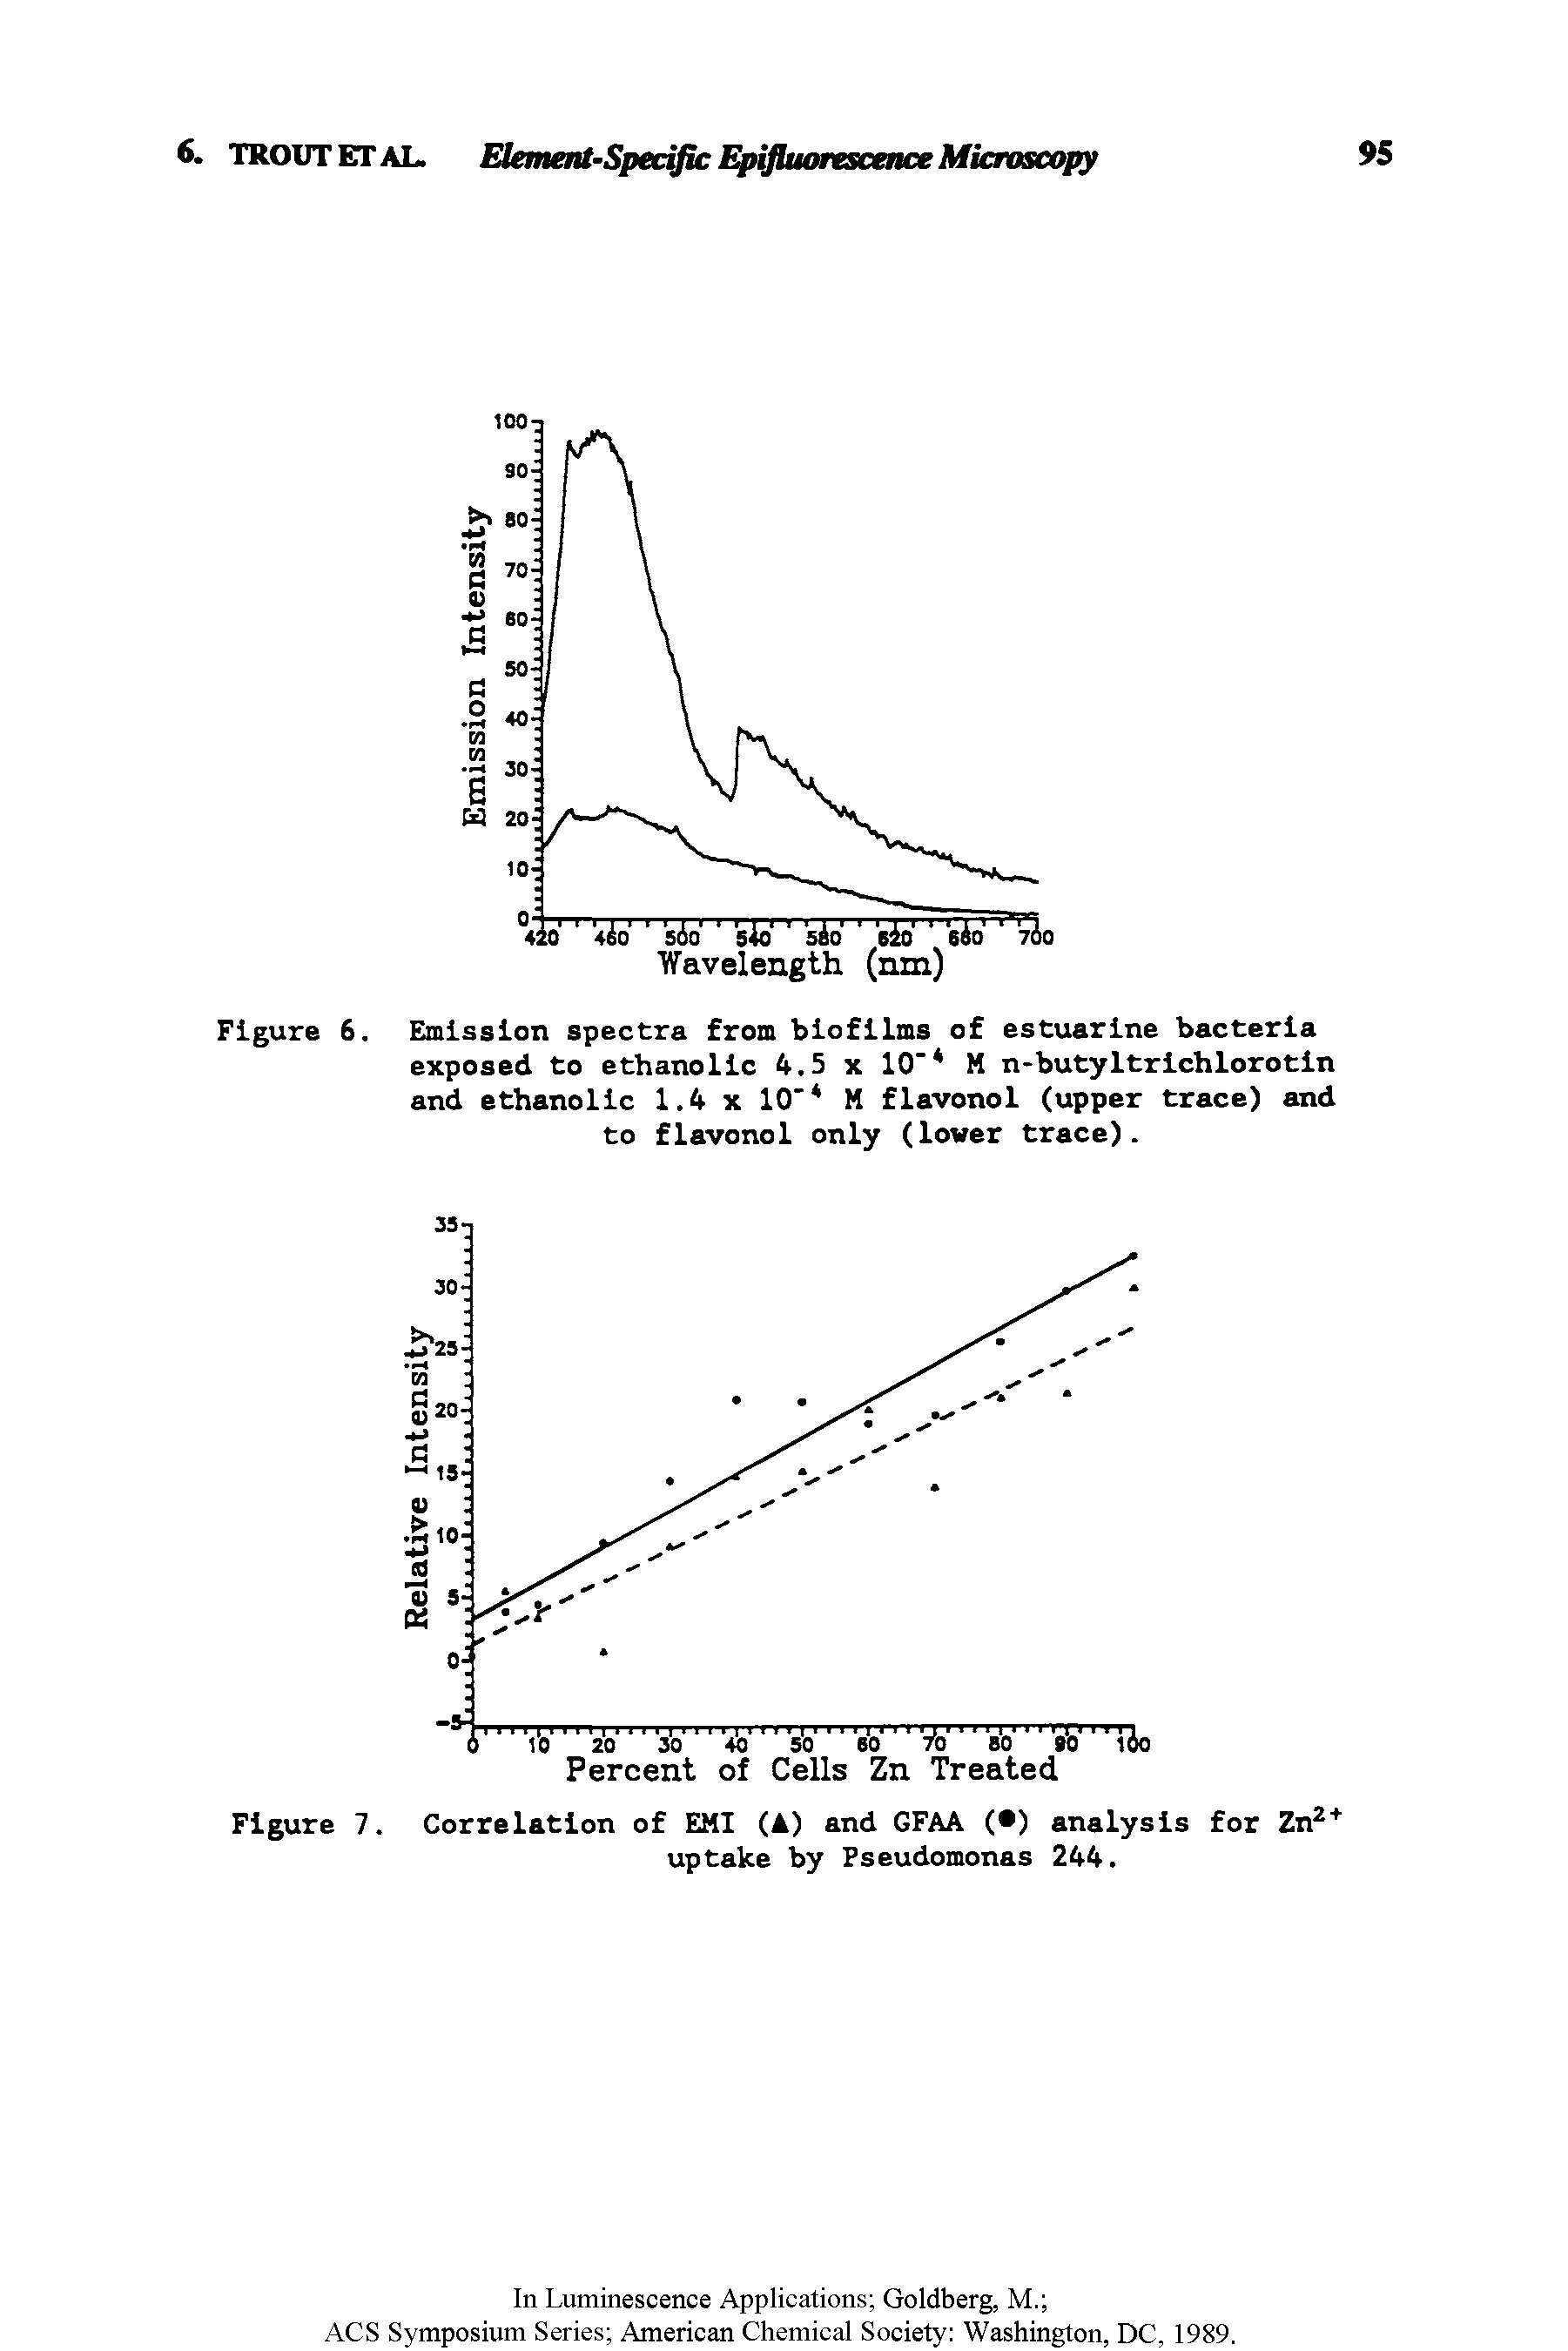 Figure 6. Emission spectra from biofilms of estuarine bacteria exposed to ethanolic 4.5 x 10" M n-butyltrichlorotin and ethanolic 1.4 x 10" M flavonol (upper trace) and to flavonol only (lower trace).